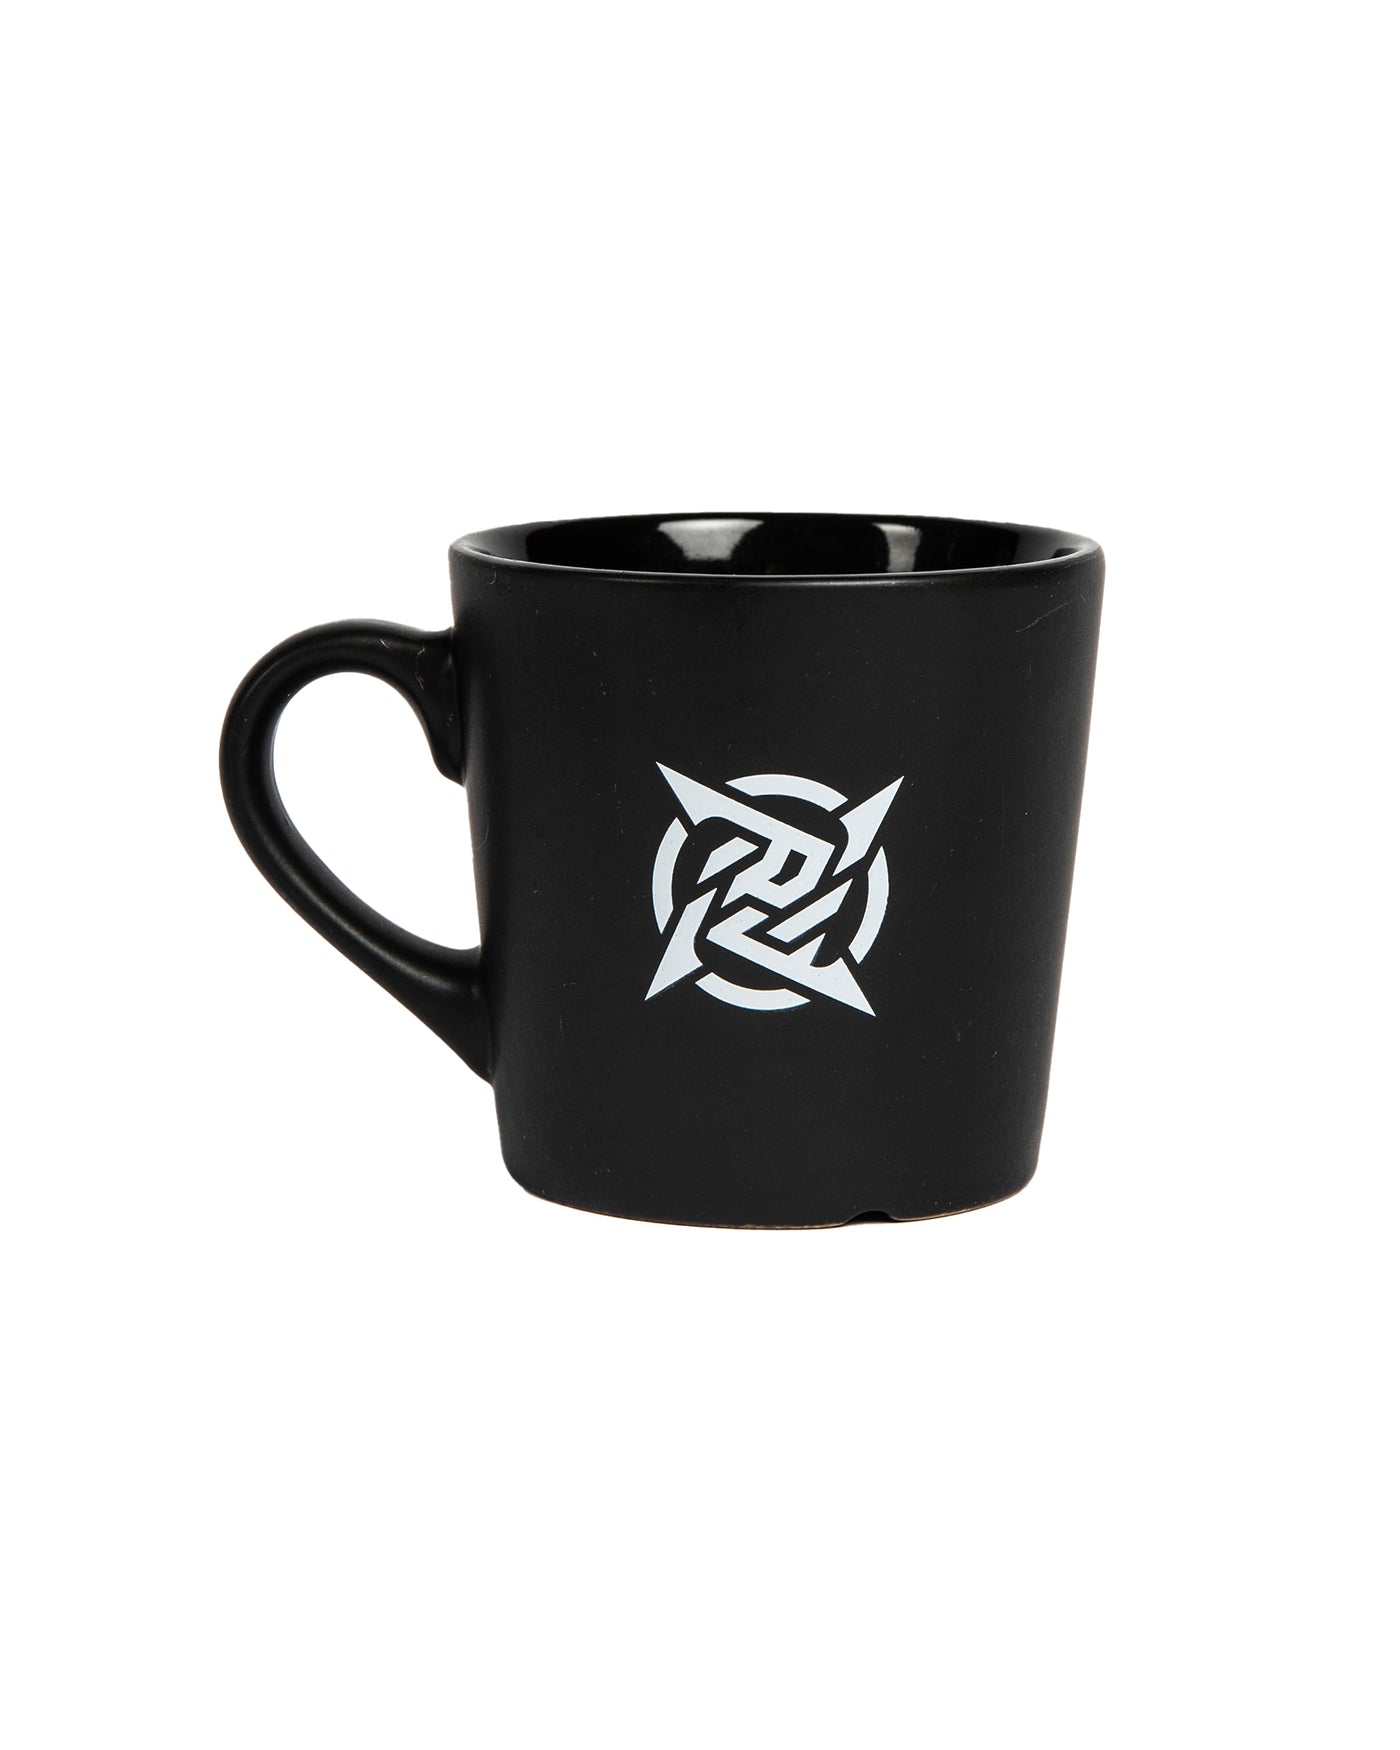 Lagom Mug - Black from Ninjas in Pyjamas Shop. A black mug from the Lagom Merch Collection, featuring the Ninjas in Pyjamas logo in sleek white print. This high-quality mug is perfect for enjoying your favorite beverages while expressing your passion forNIP and esports.